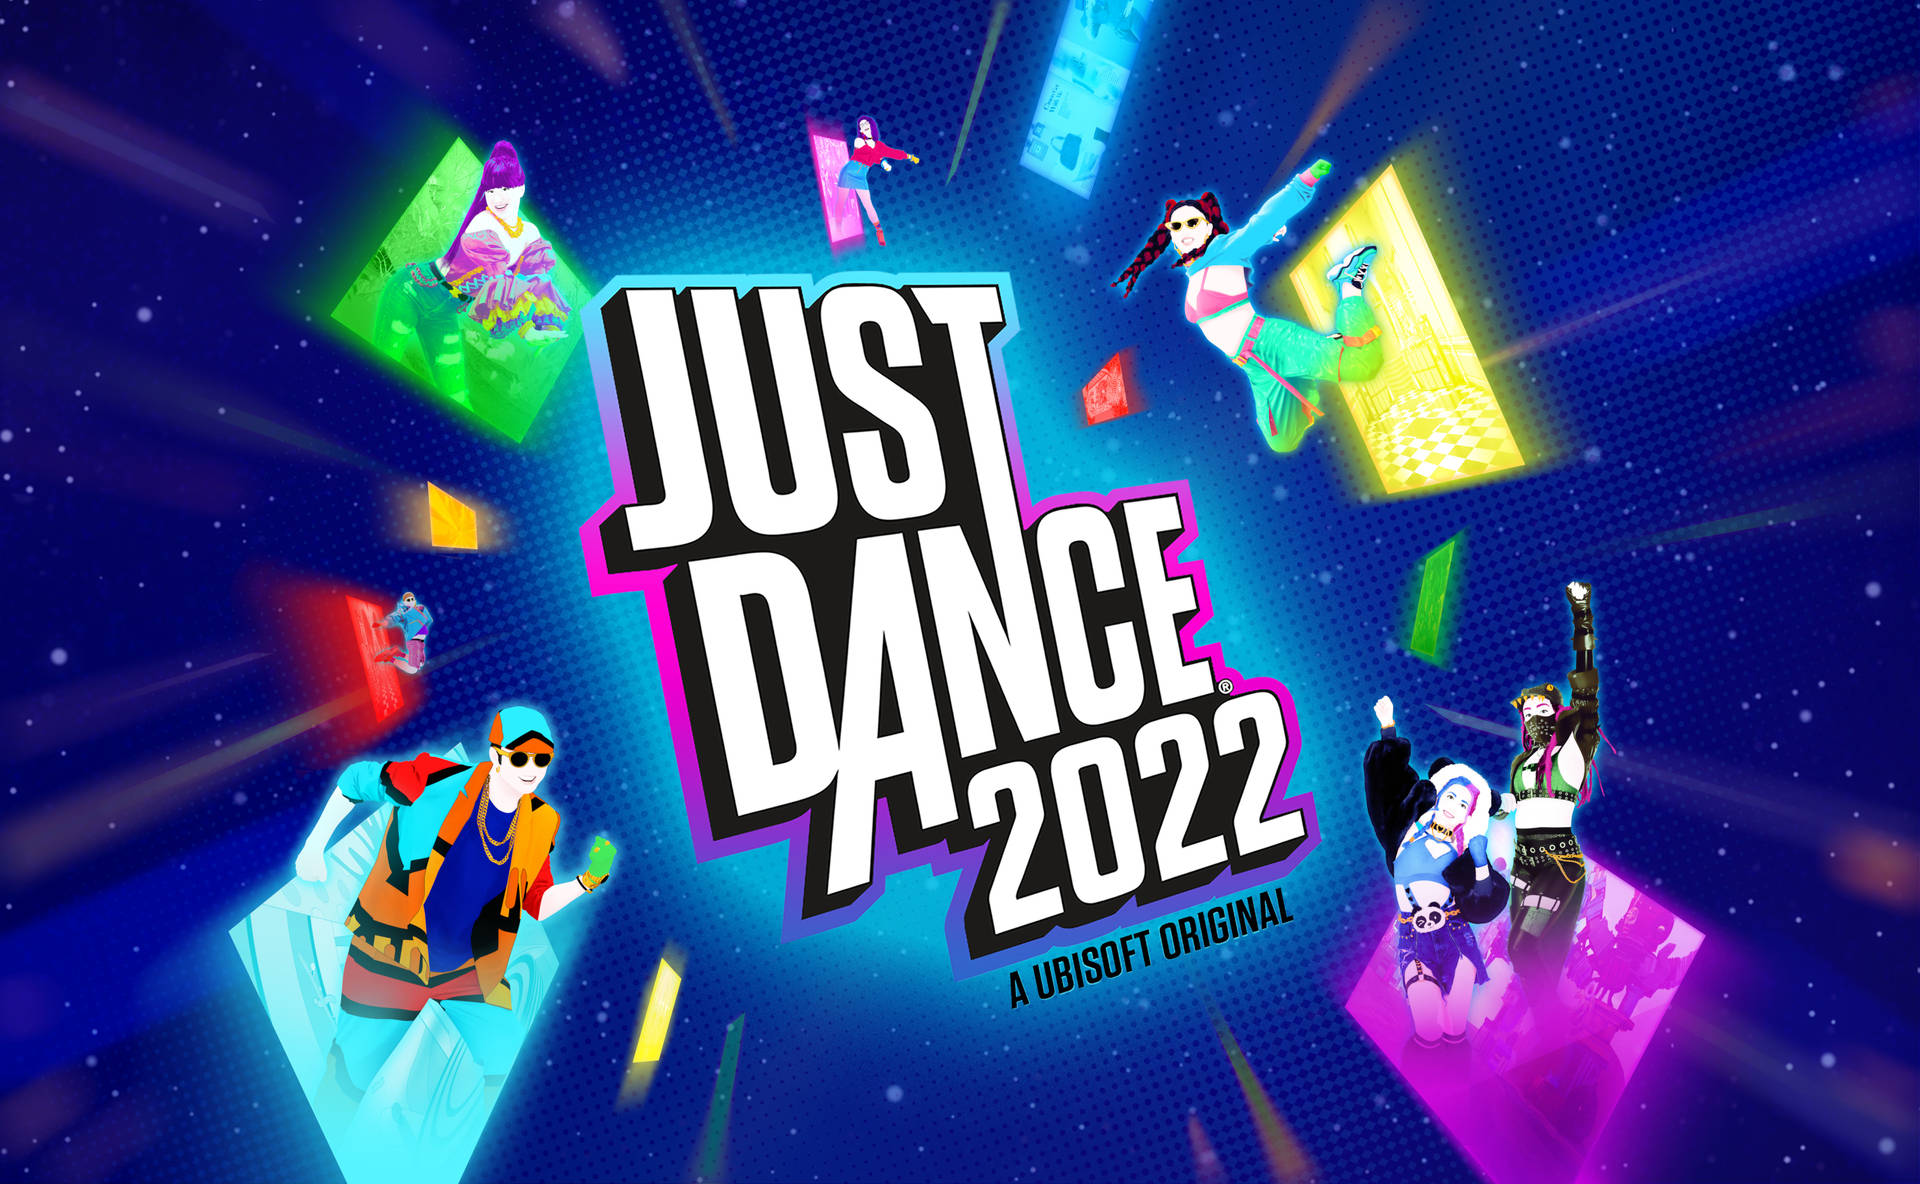 Just Dance 2022 Poster Background